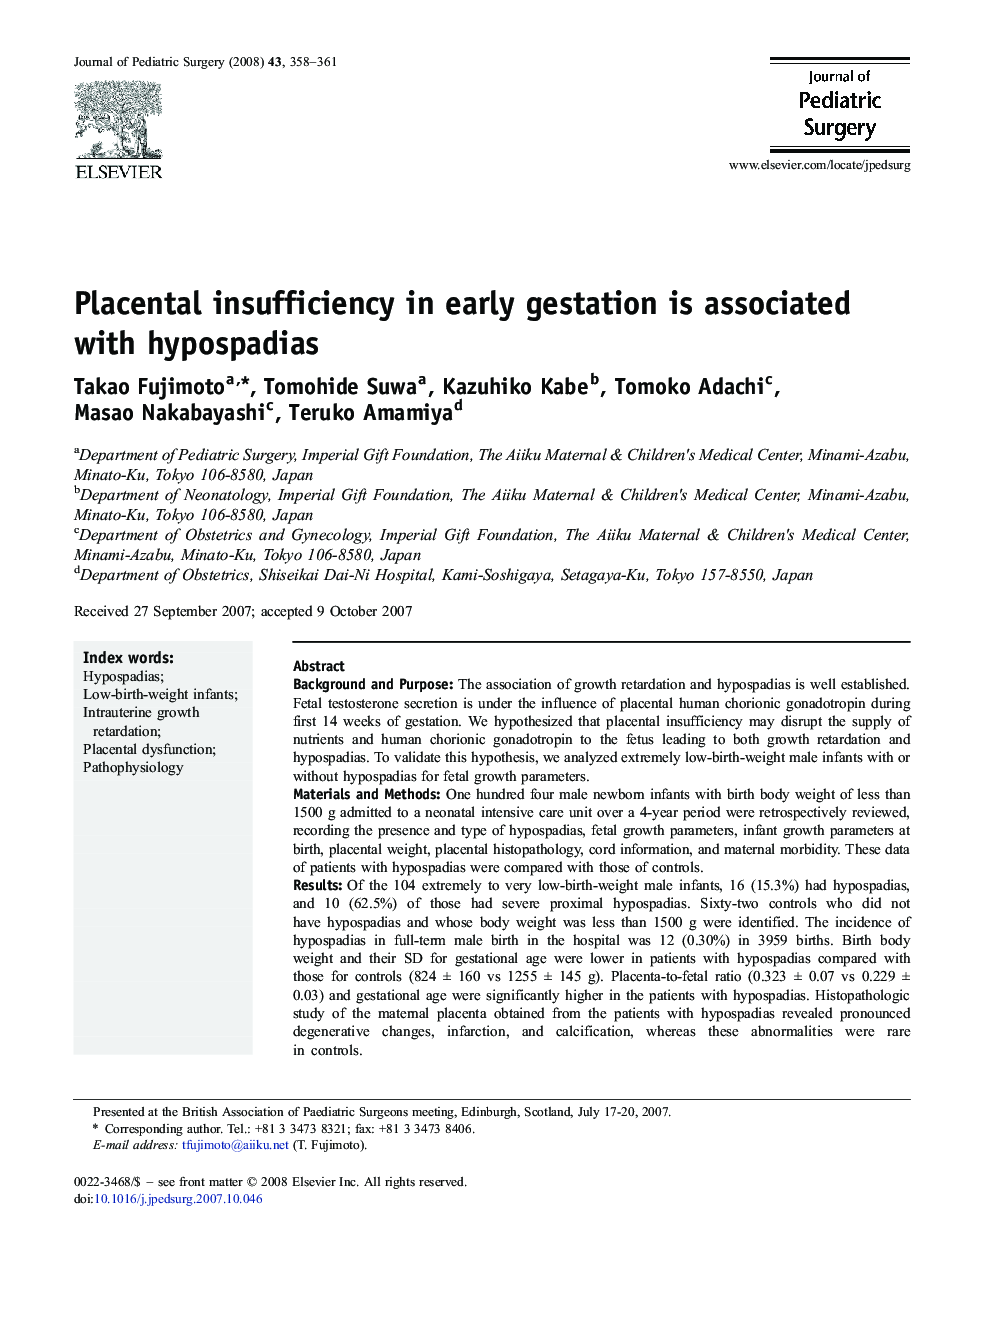 Placental insufficiency in early gestation is associated with hypospadias 